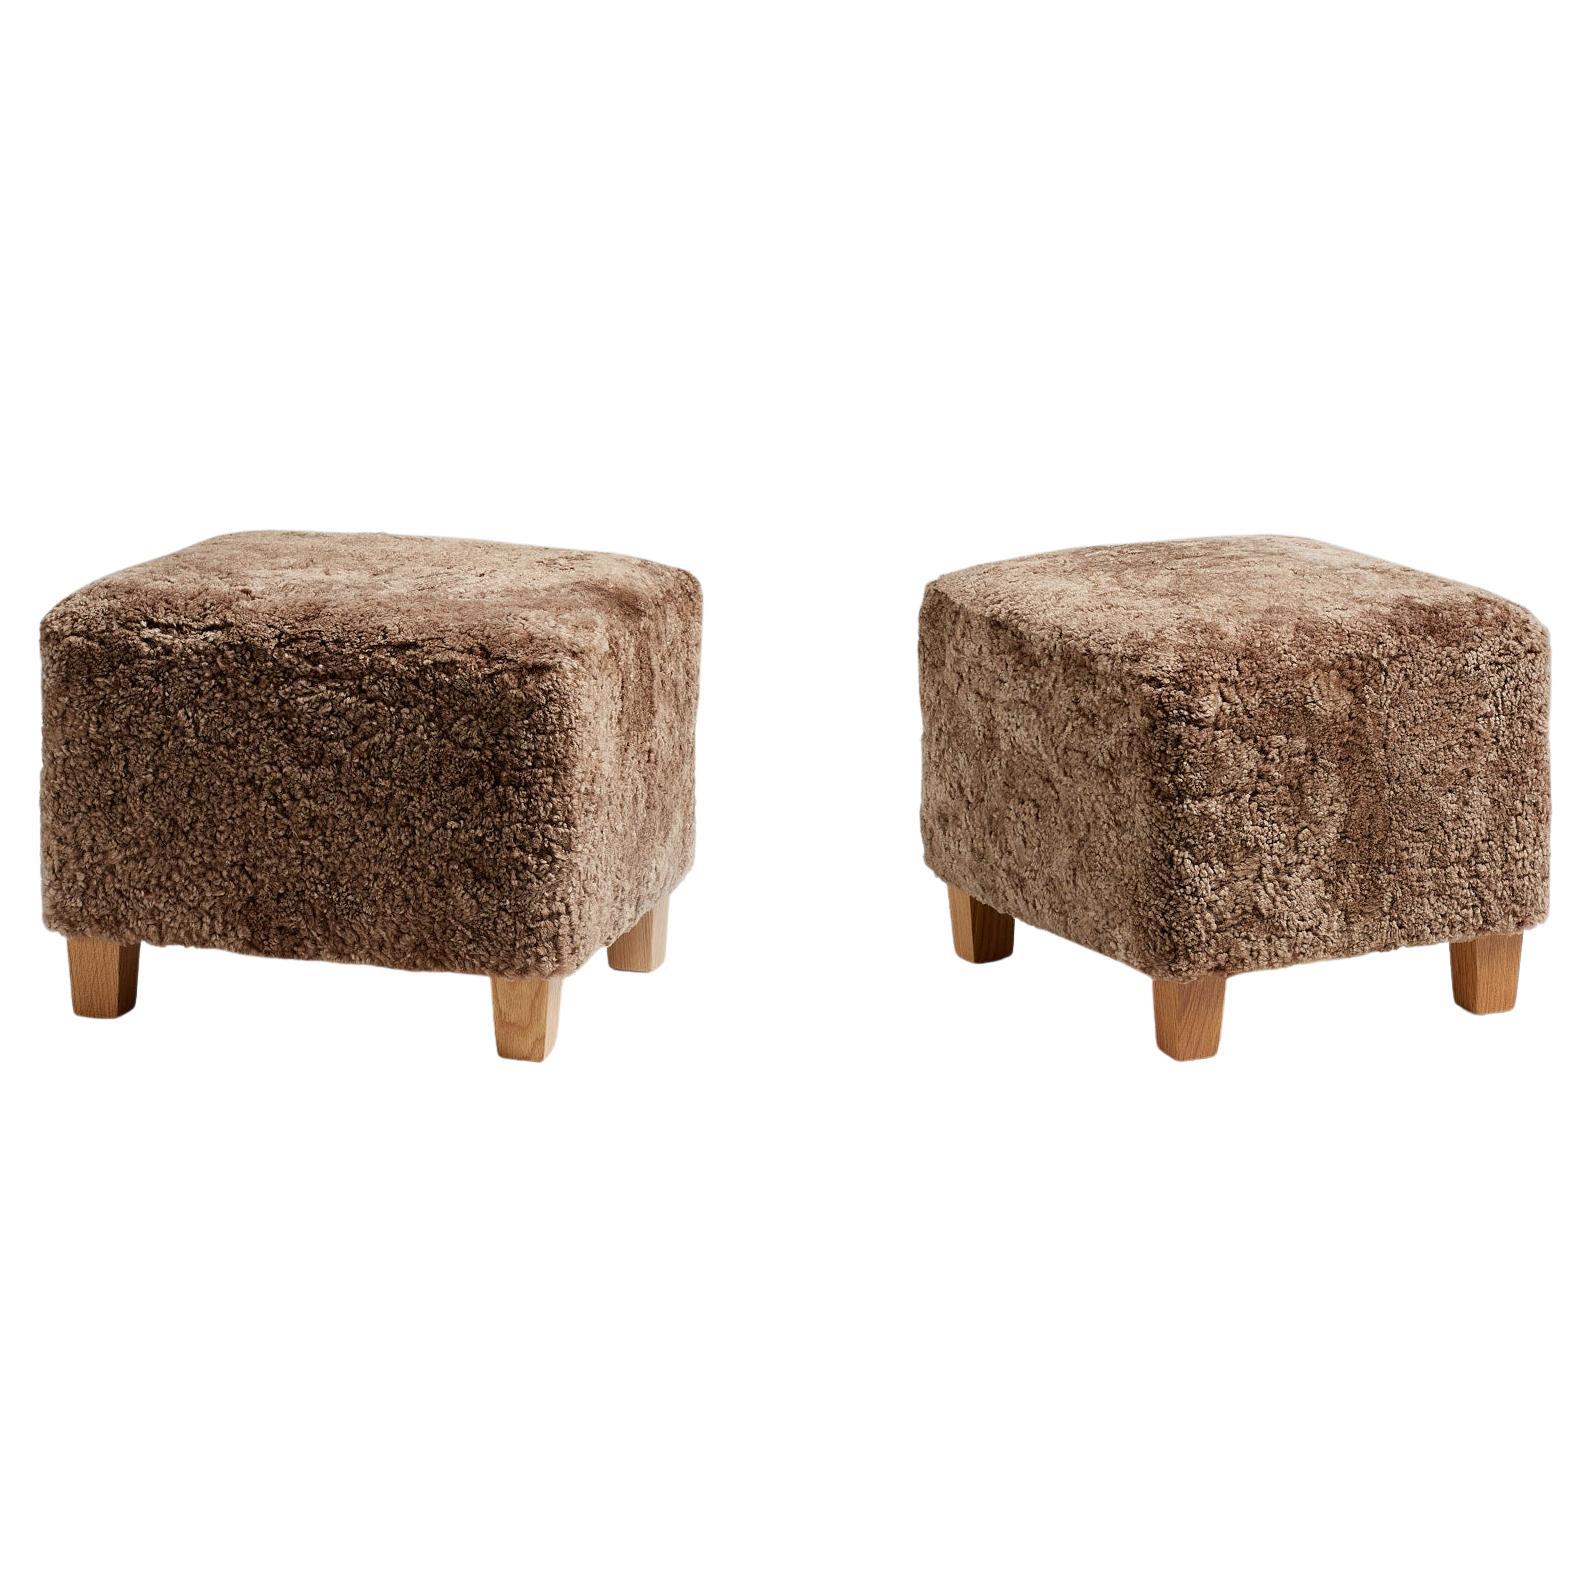 Dagmar Design - Karu Ottoman

Custom-made ottoman developed & produced at our workshops in London using the highest quality materials. This example is upholstered in Sahara sheepskin with feet in oiled oak. This ottoman is available to order in a